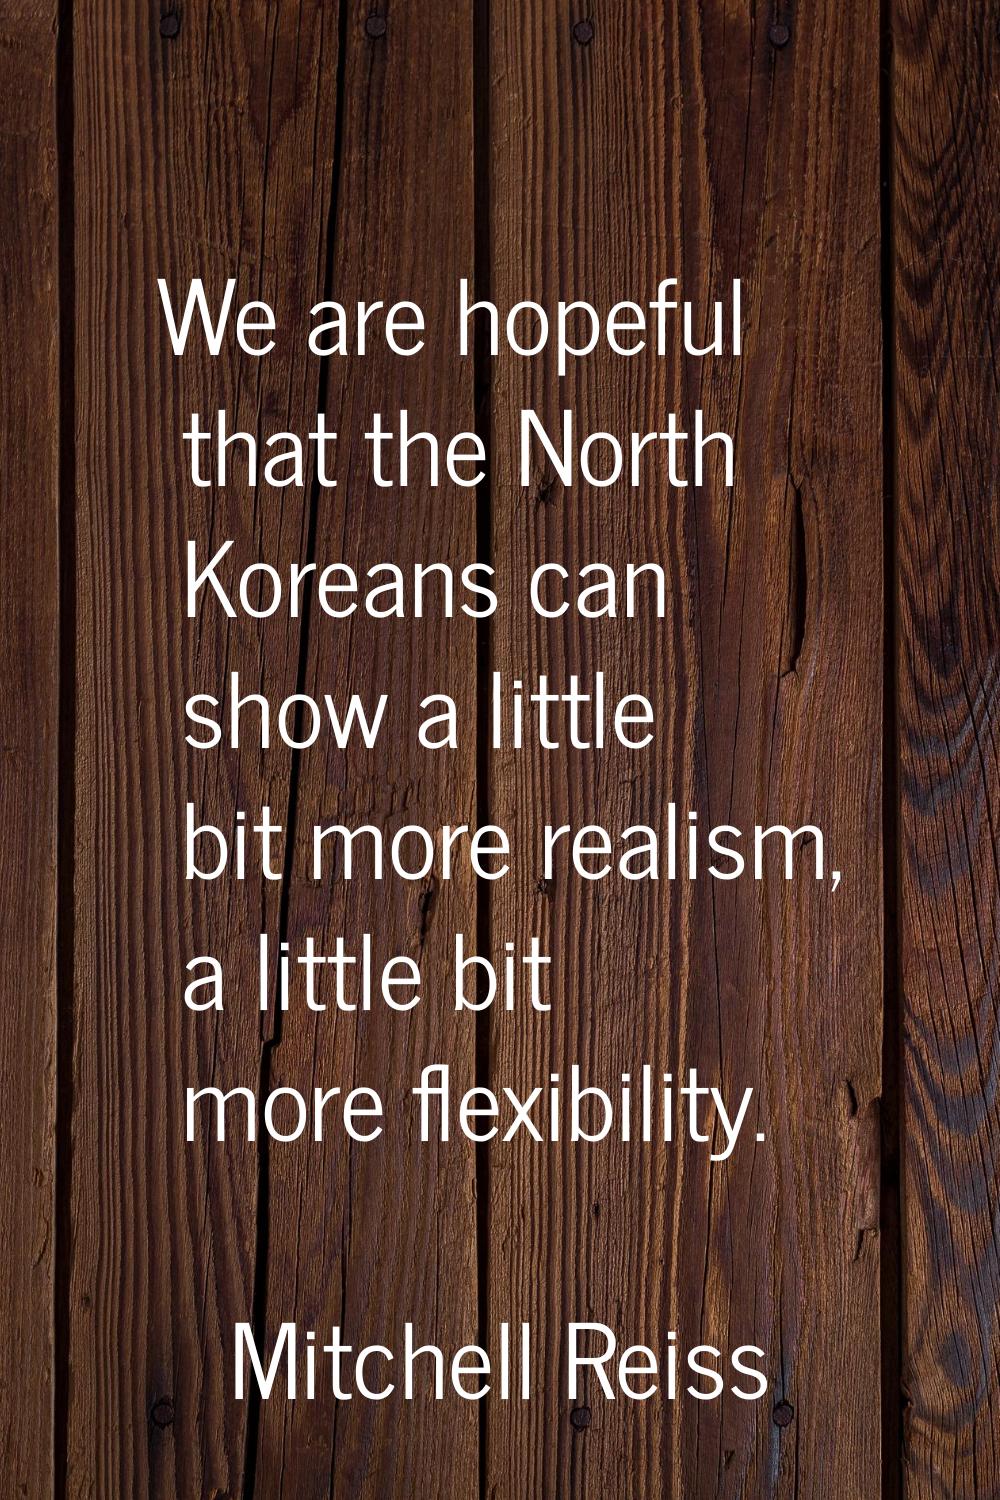 We are hopeful that the North Koreans can show a little bit more realism, a little bit more flexibi